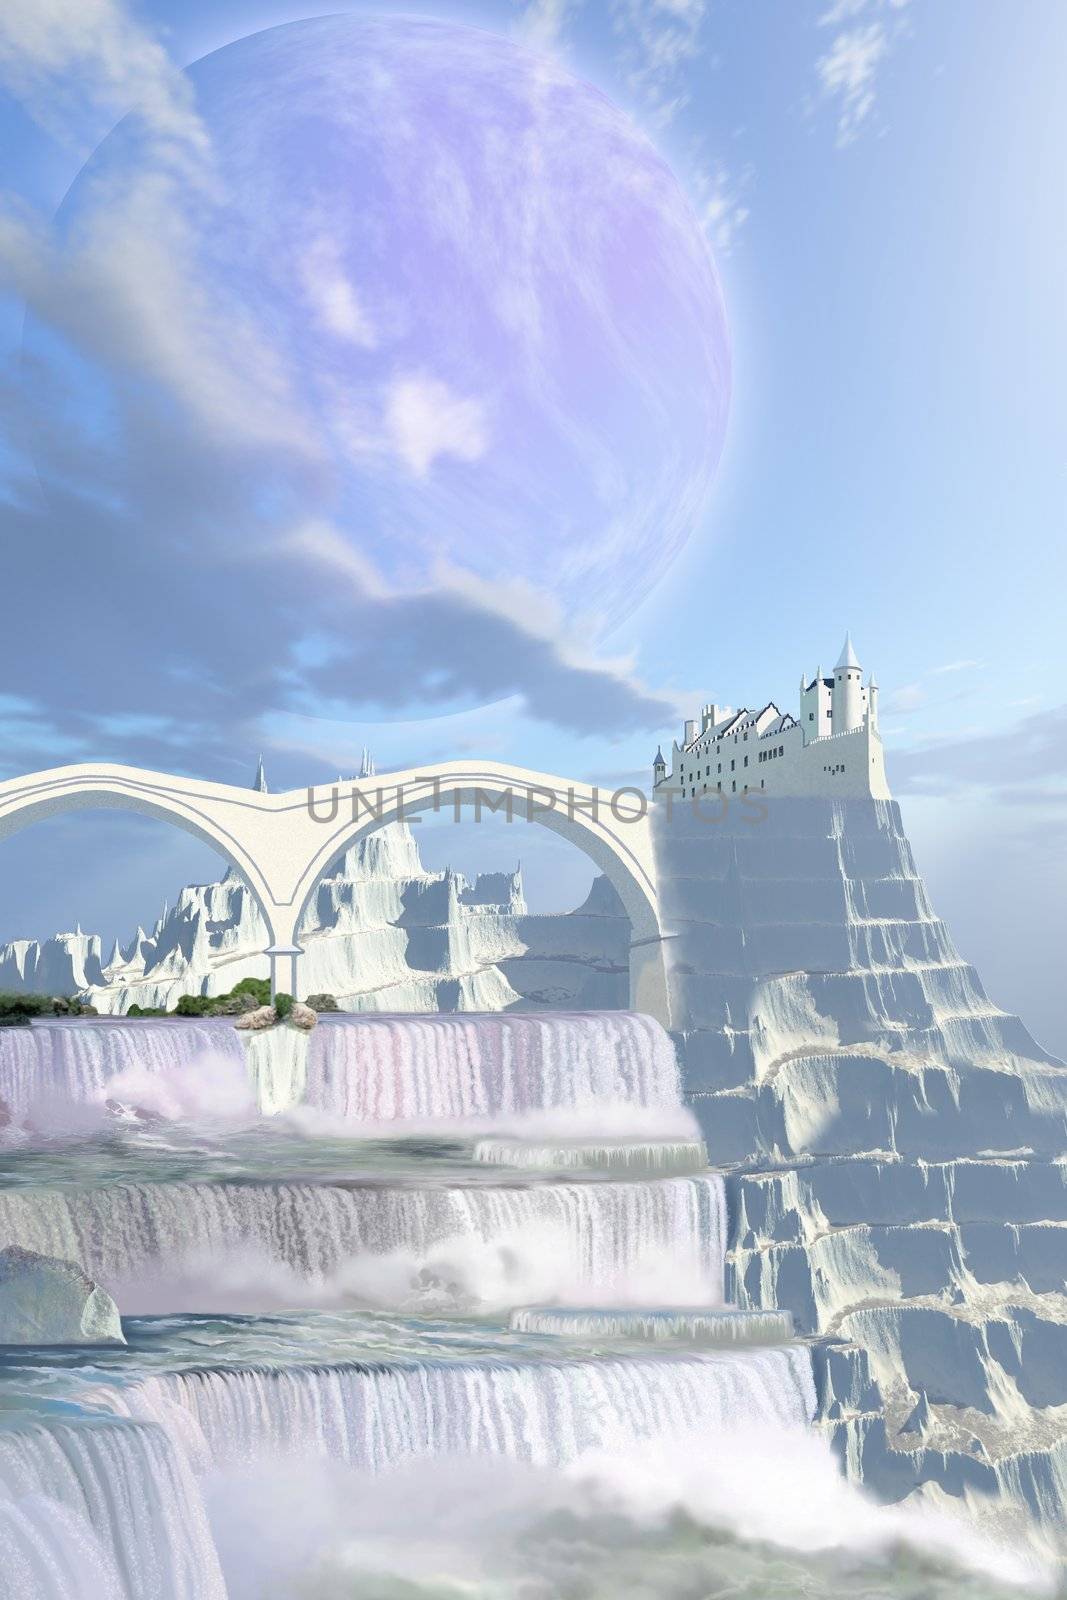 A fairy tale castle on this beautiful alien planet with gorgeous waterfalls.